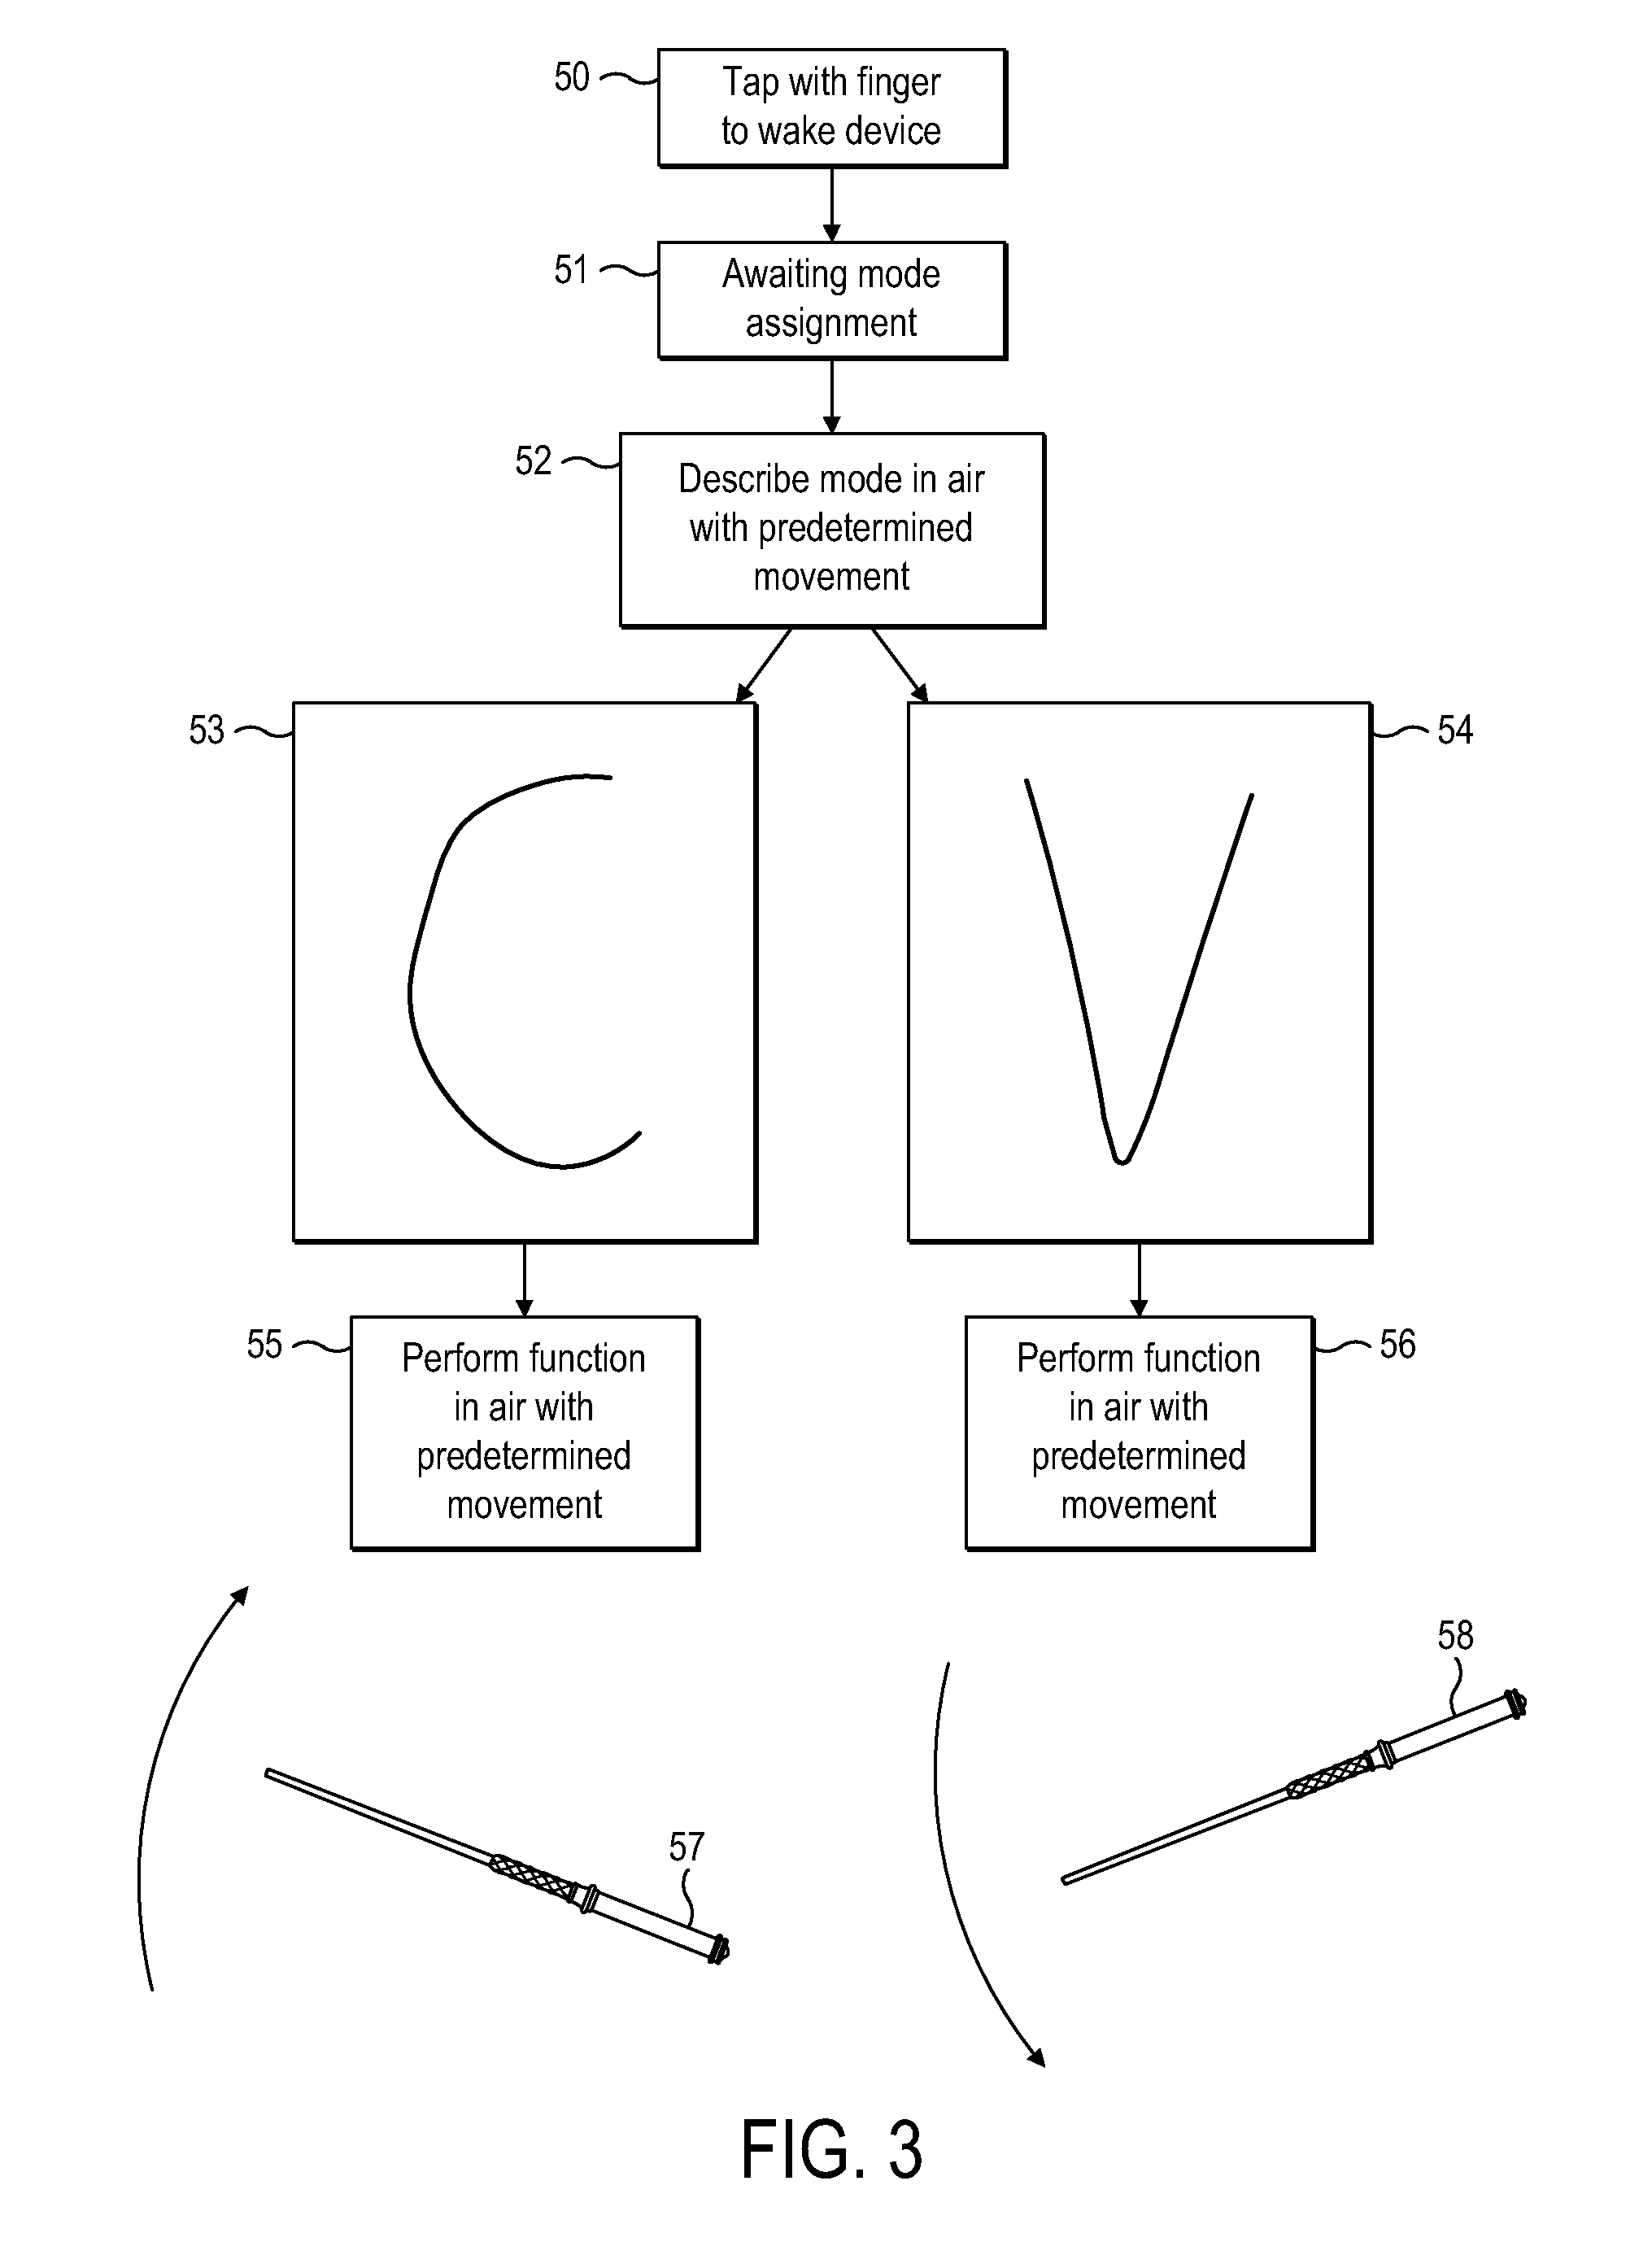 Remote control device, in particular a wand having motion detection